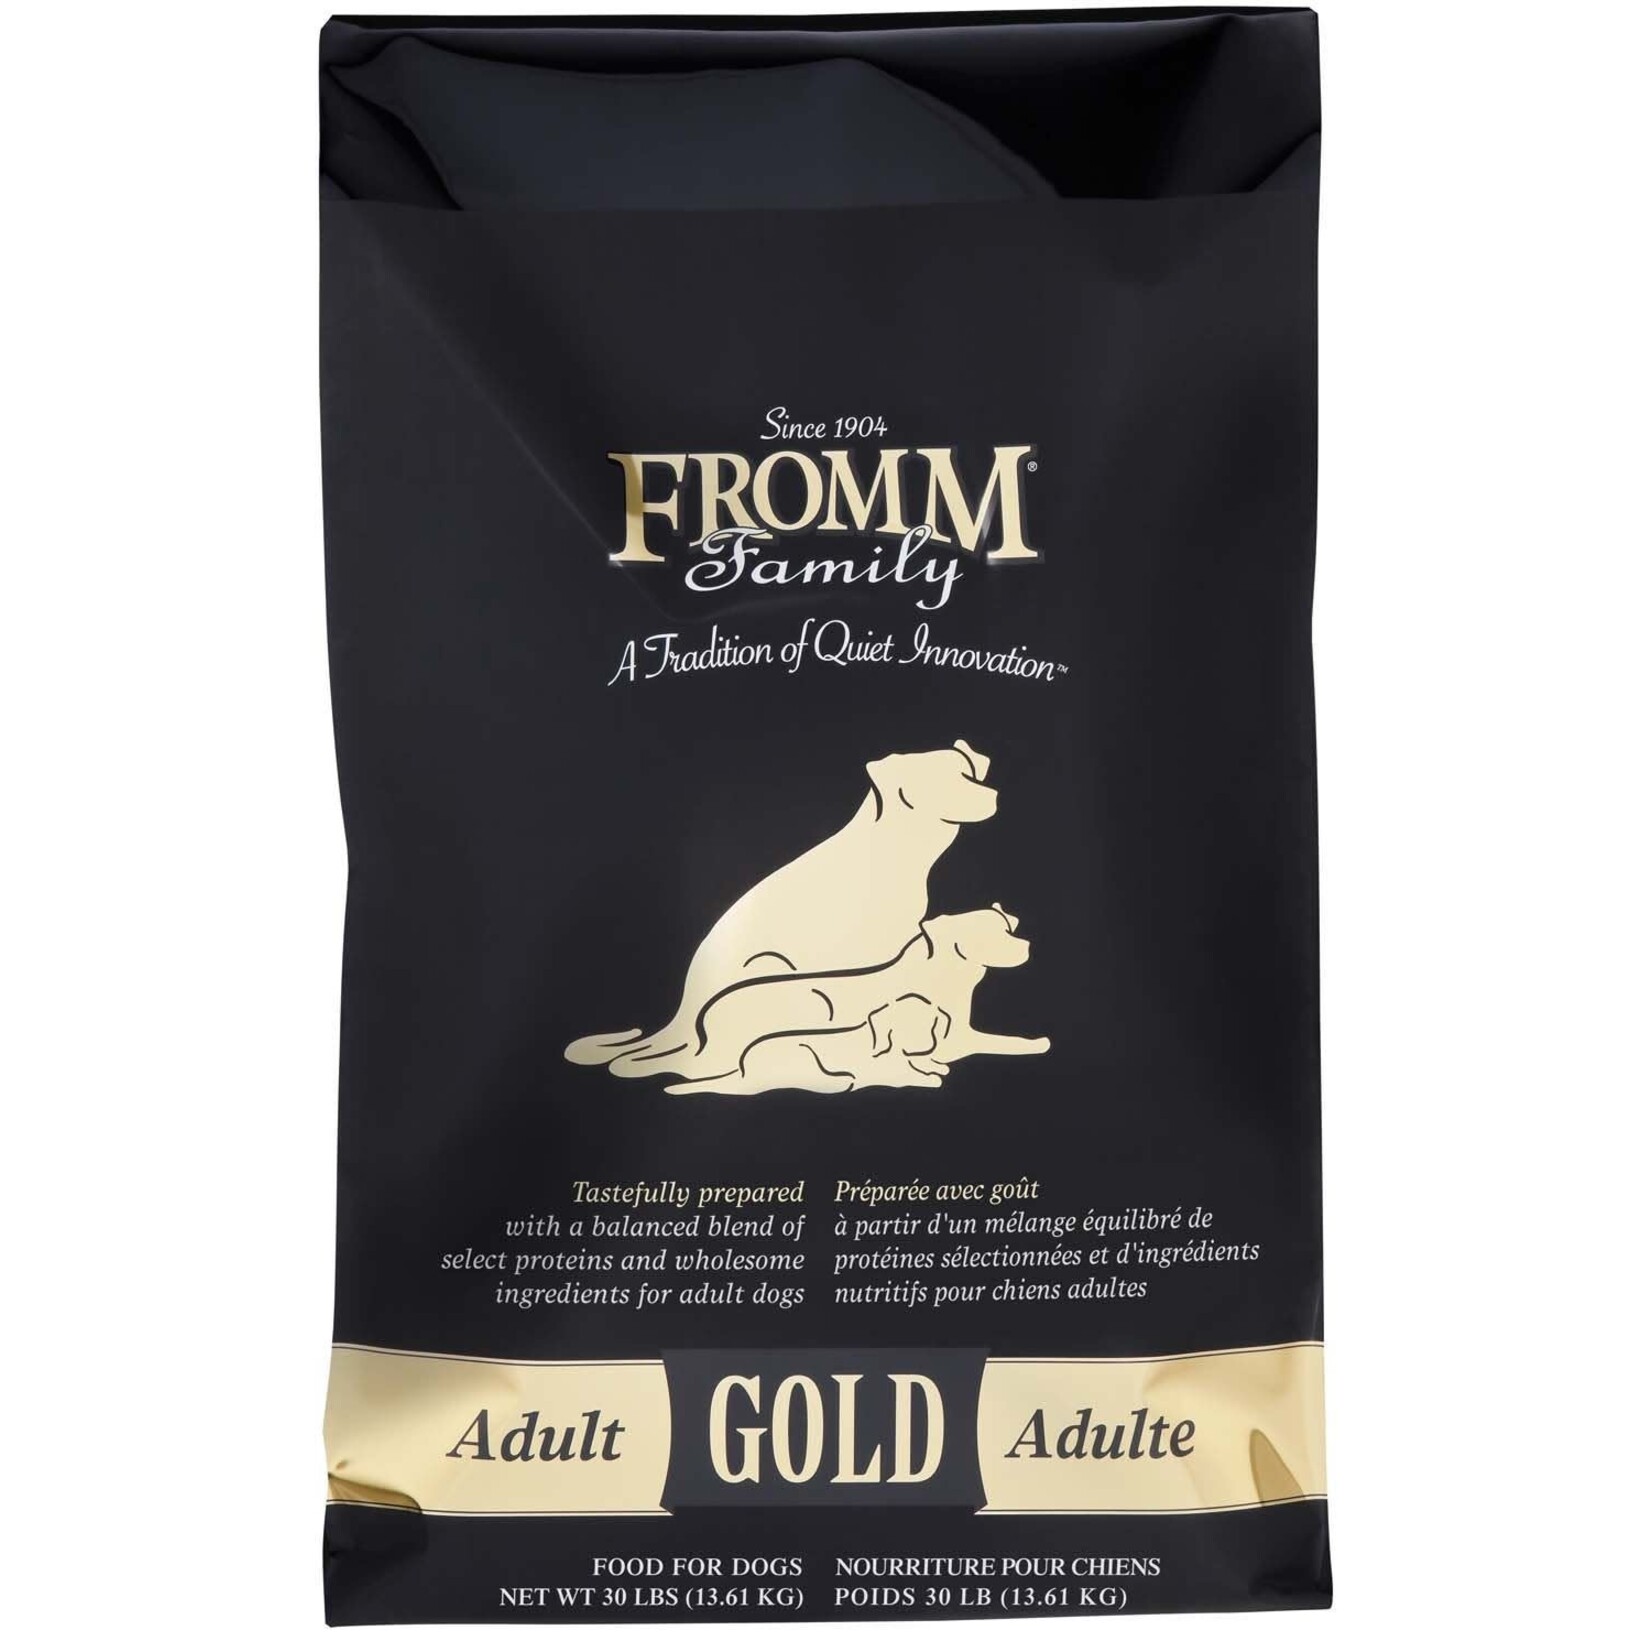 Fromm Adult Gold Food for Dogs